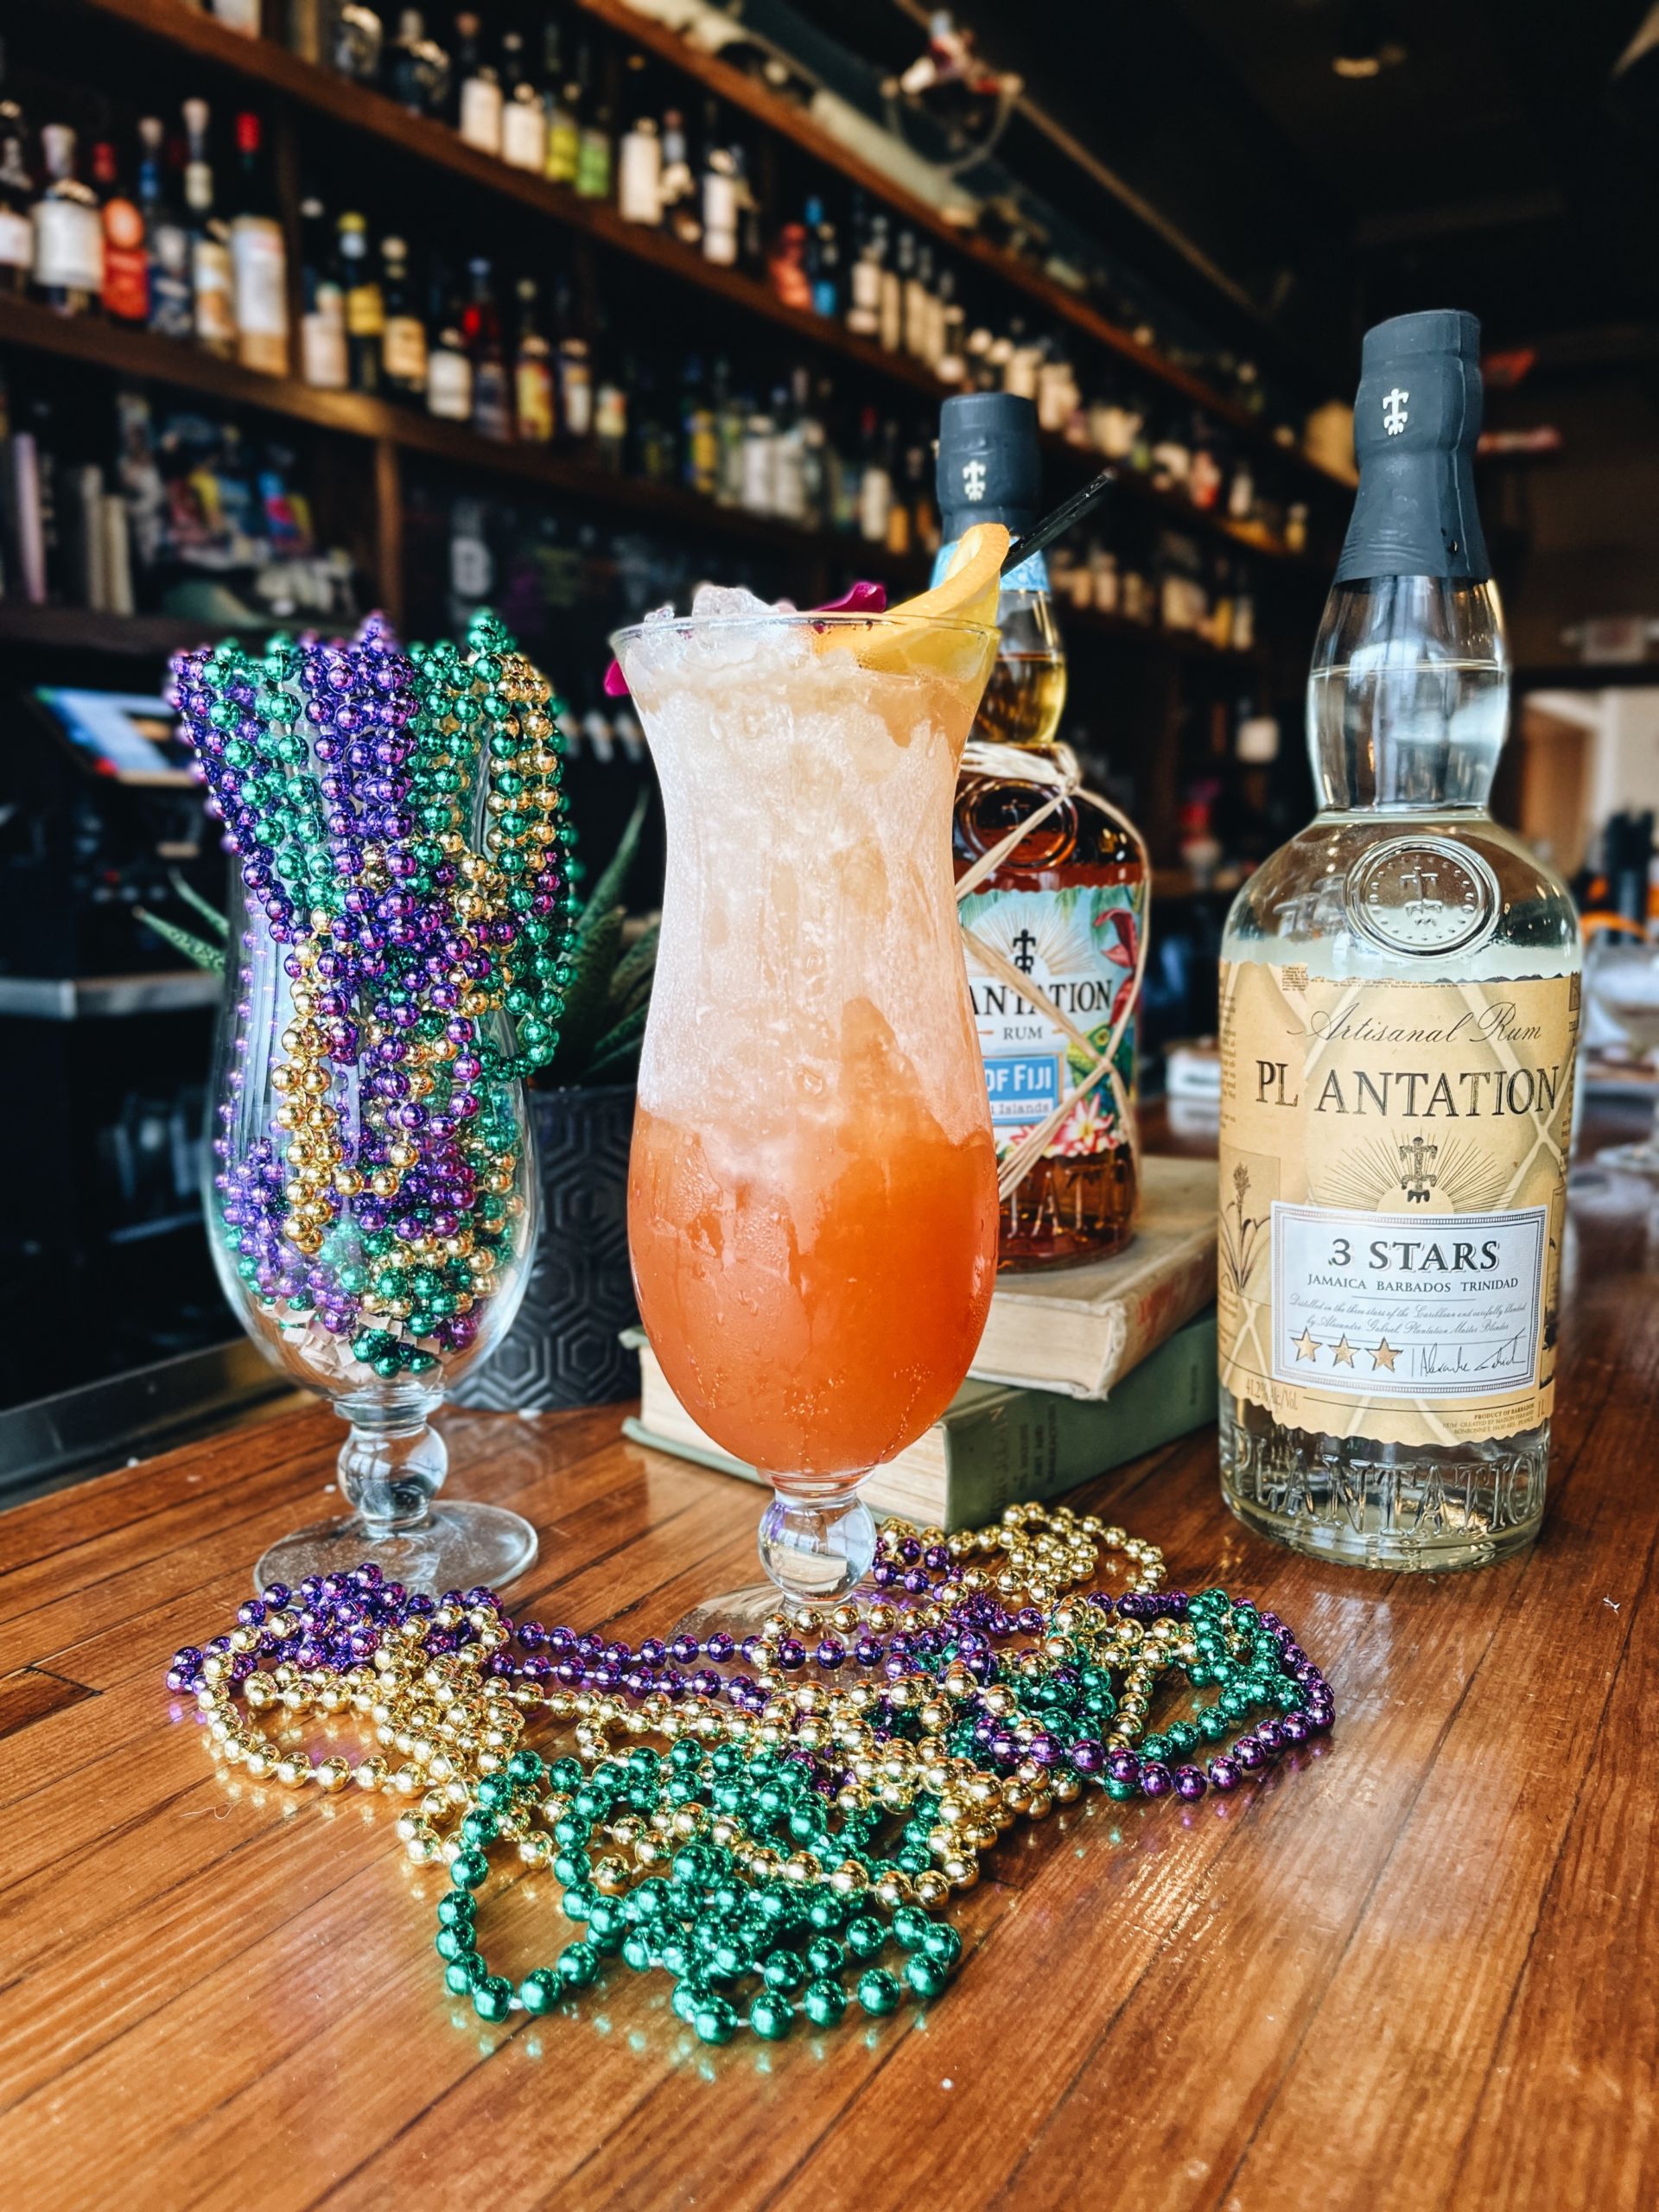 Amelia's Hurricane cocktail displayed next to a glass filled with beads